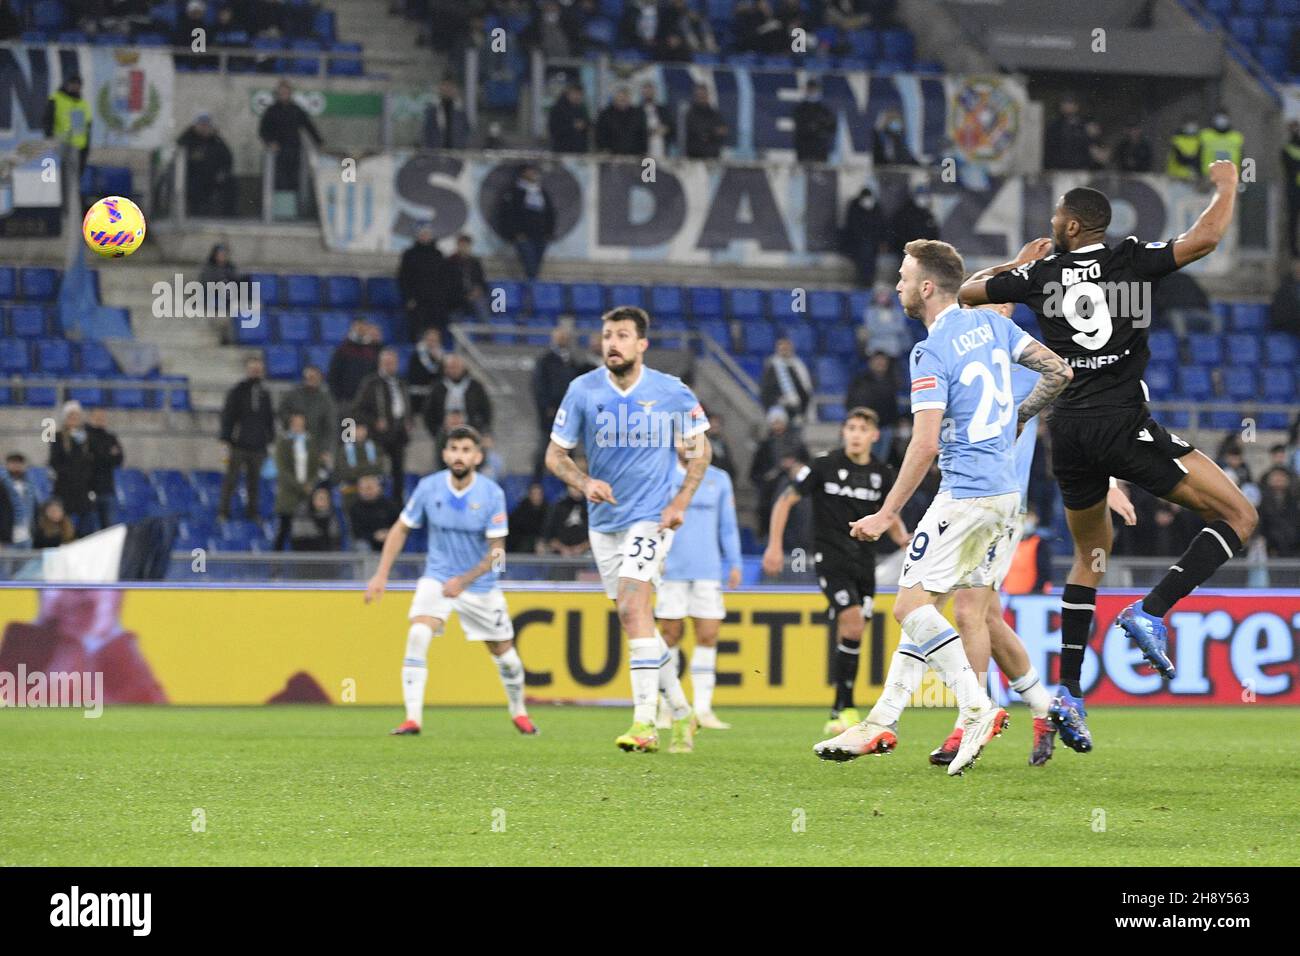 Rome, Italy. 2 December 2021, Norberto Bercique Gomes Betuncal (Udinese) gol 0-1 during the  Italian Football Championship League A 2021/2022 match between SS Lazio vs Udinese Calcio at the Olimpic Stadium in Rome on 02 December 2021. Stock Photo